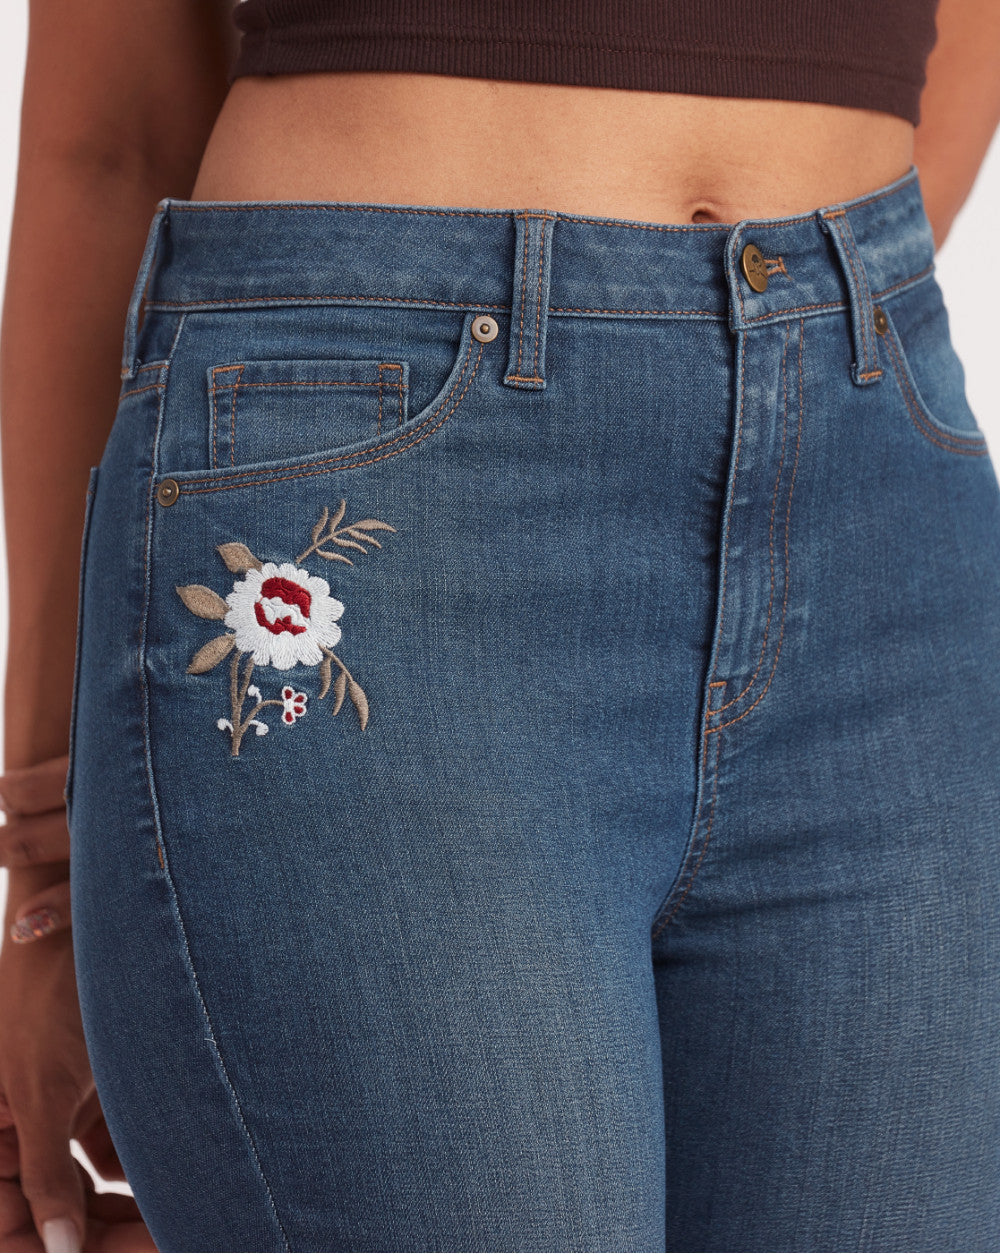 Skinny Fit, Floral Embroidered Jeans - Classic Blue